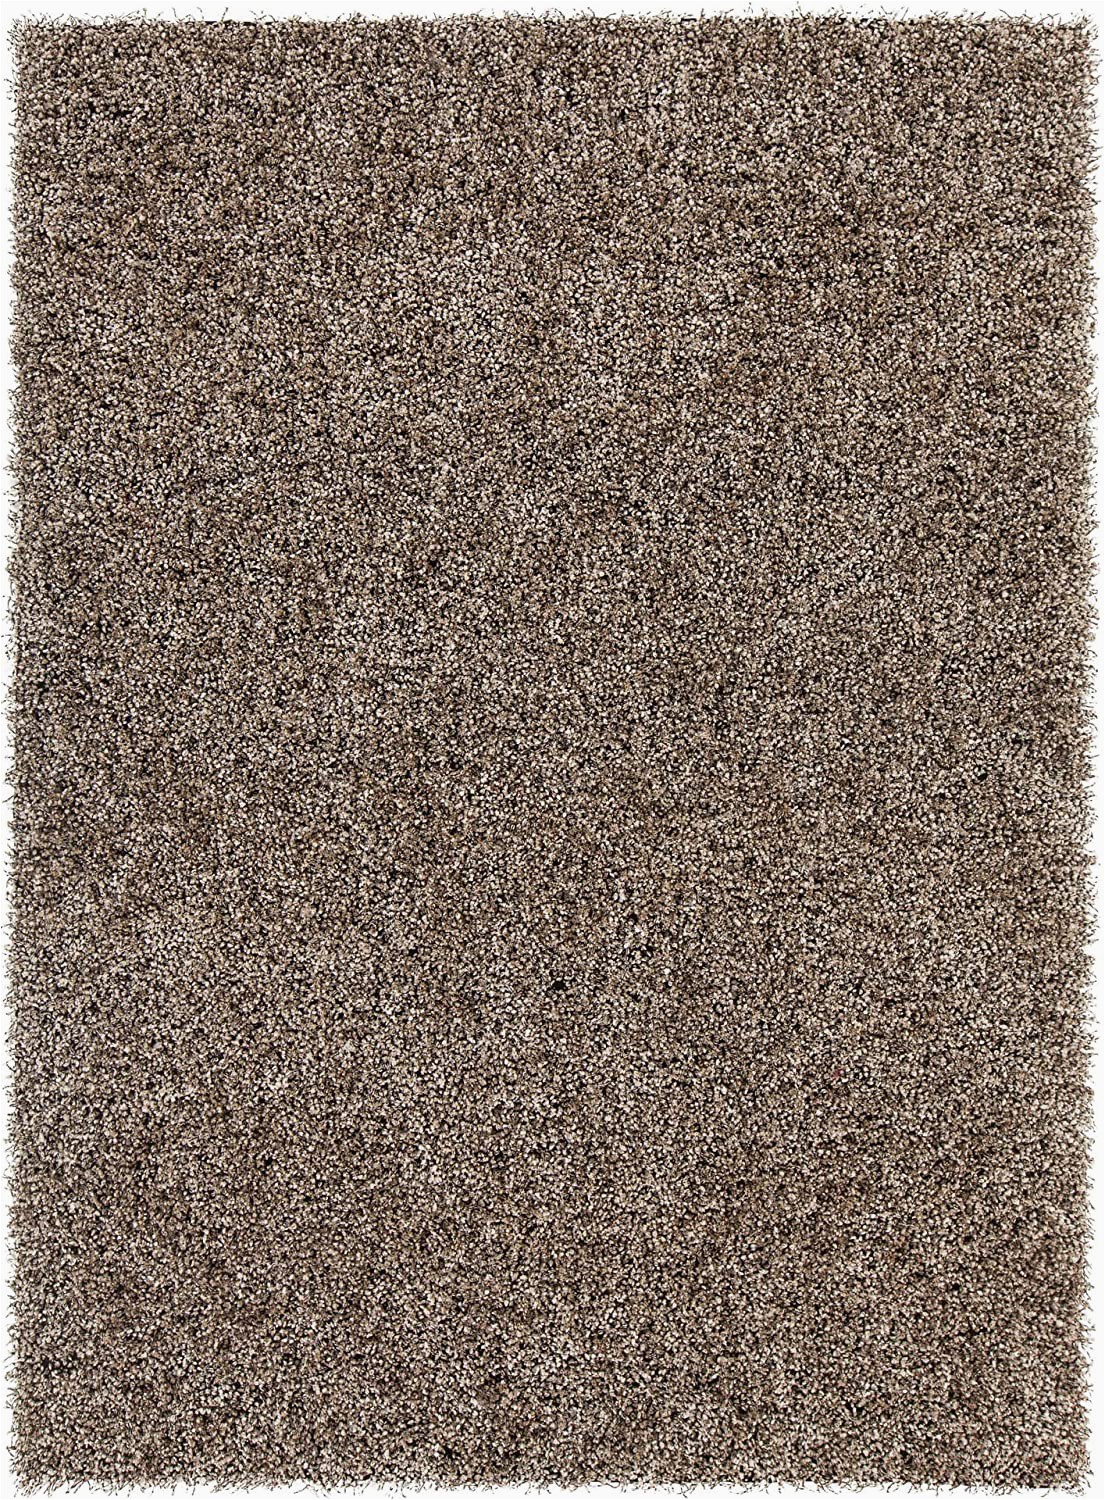 60 X 80 area Rug Amazon Chandra Rugs Blossom area Rug 60 Inch by 84